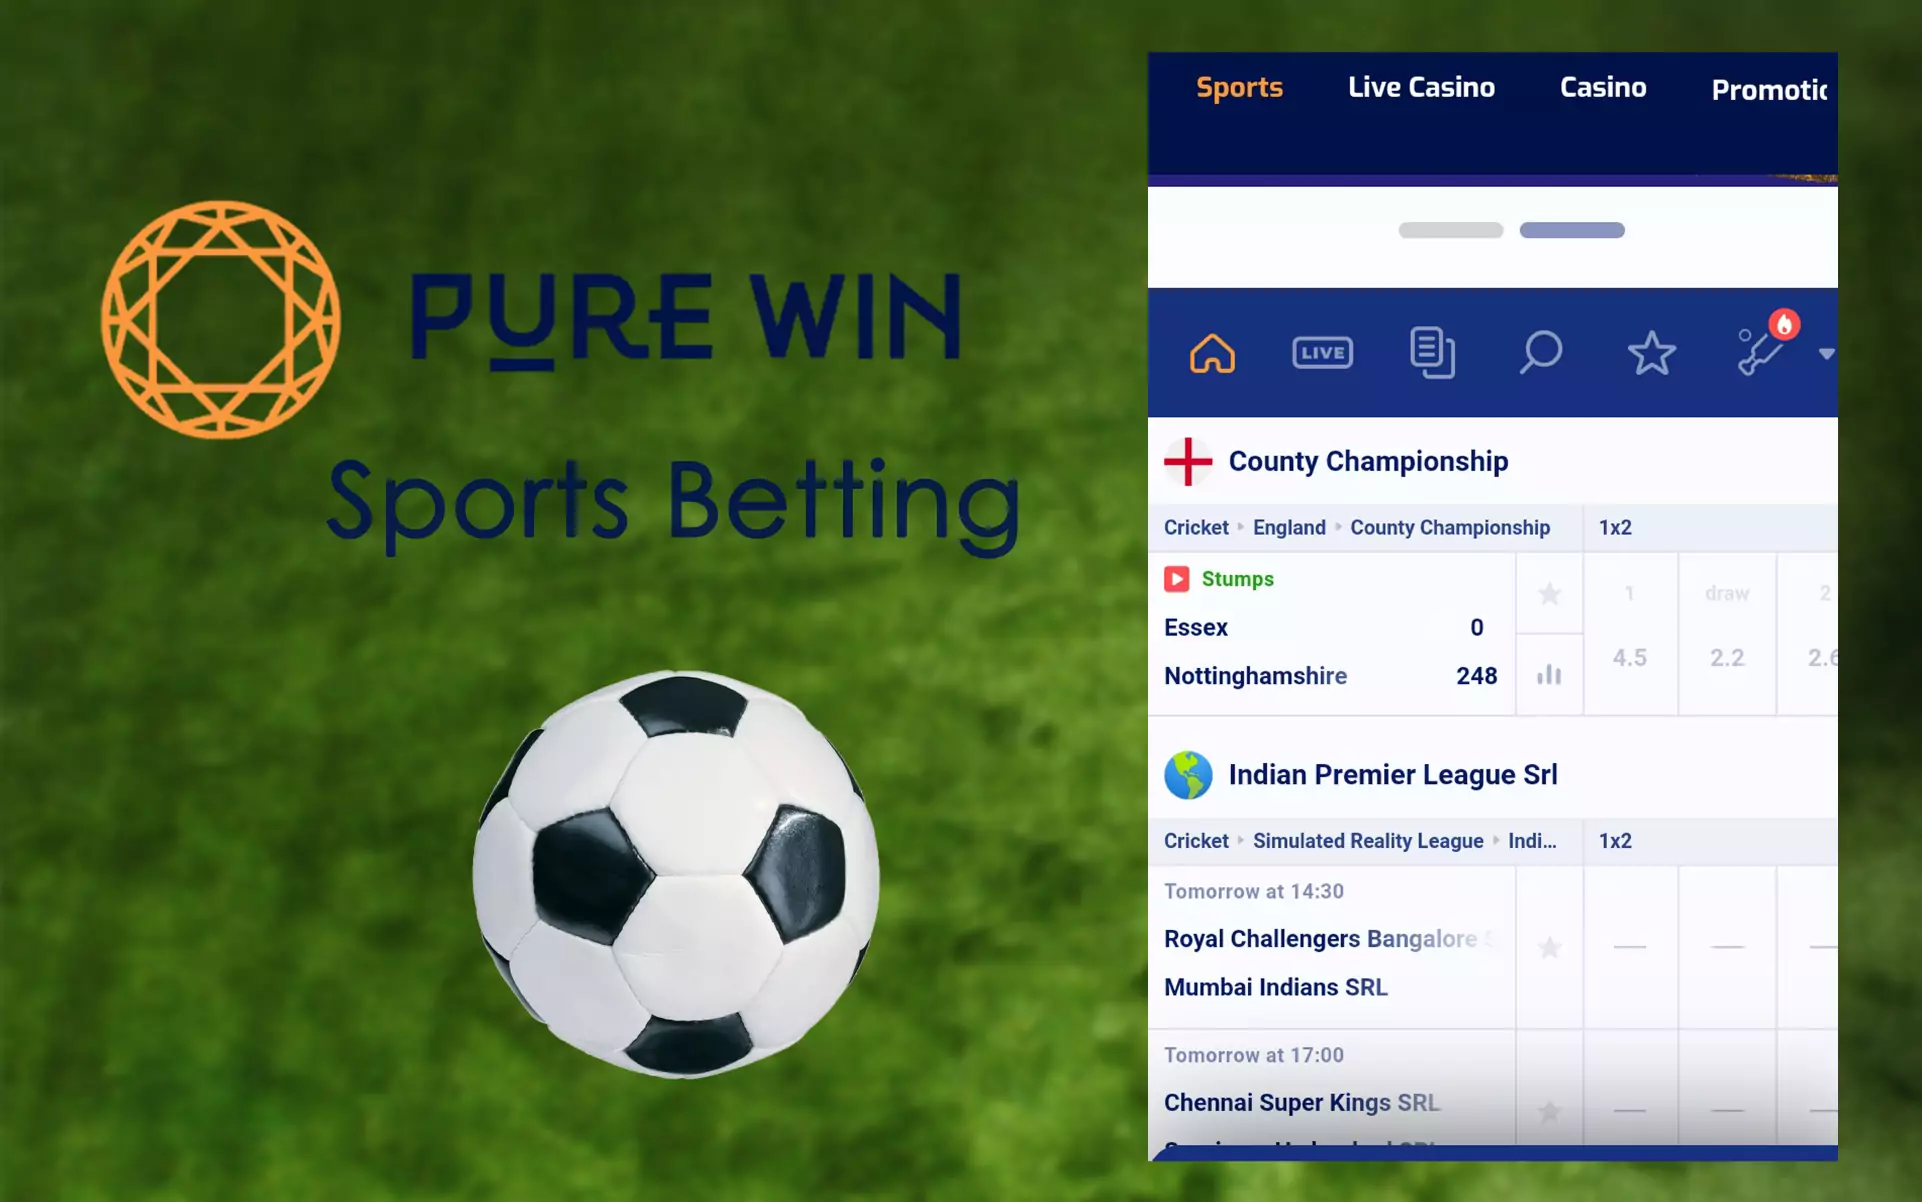 In Pure Win, users can bet on many kinds of sports.